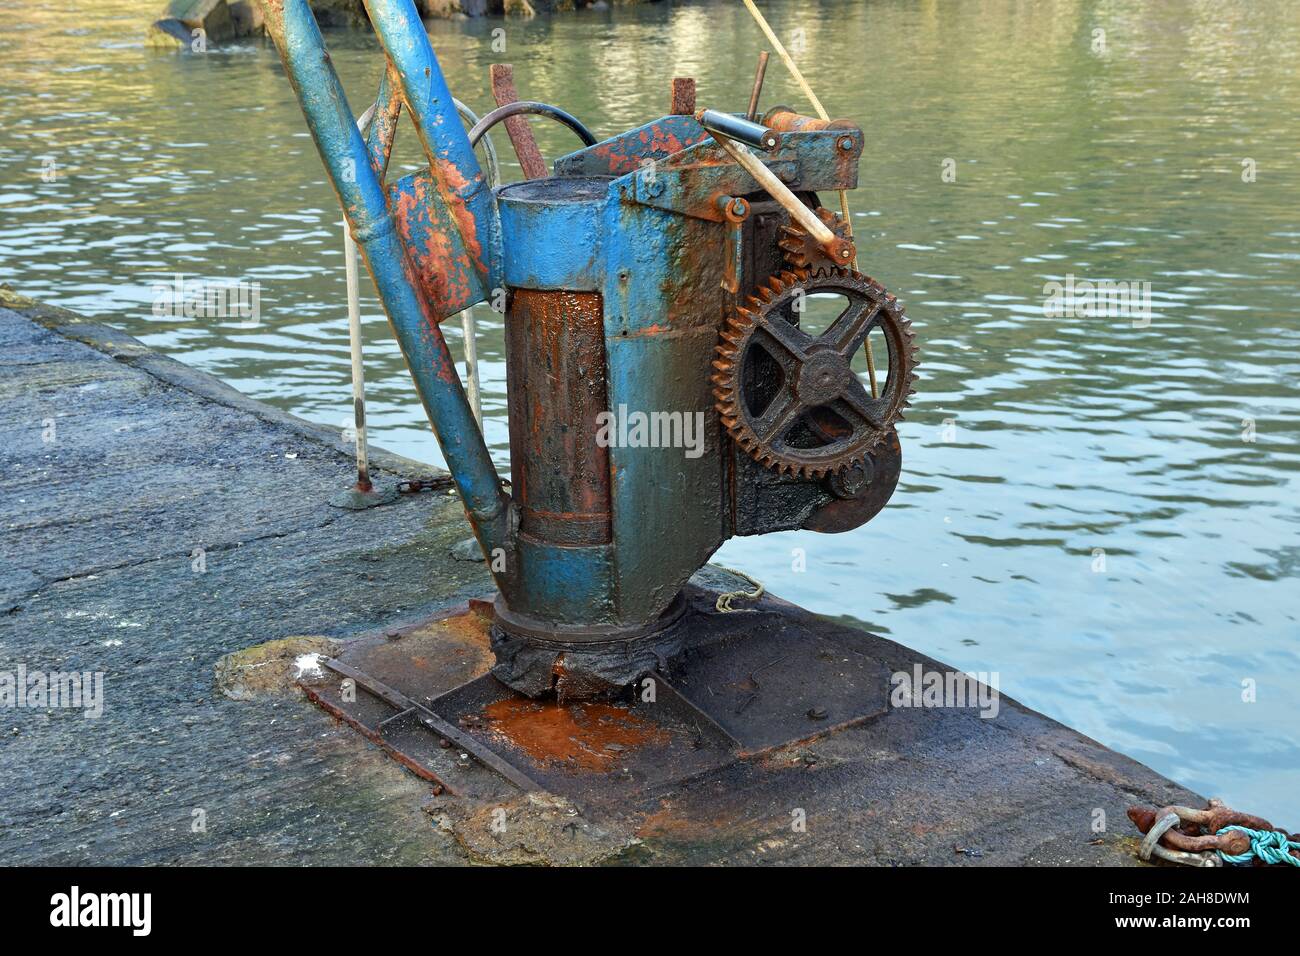 https://c8.alamy.com/comp/2AH8DWM/old-fashioned-manual-boat-lifting-mechanism-with-rusty-parts-in-harbour-setting-with-water-in-background-2AH8DWM.jpg